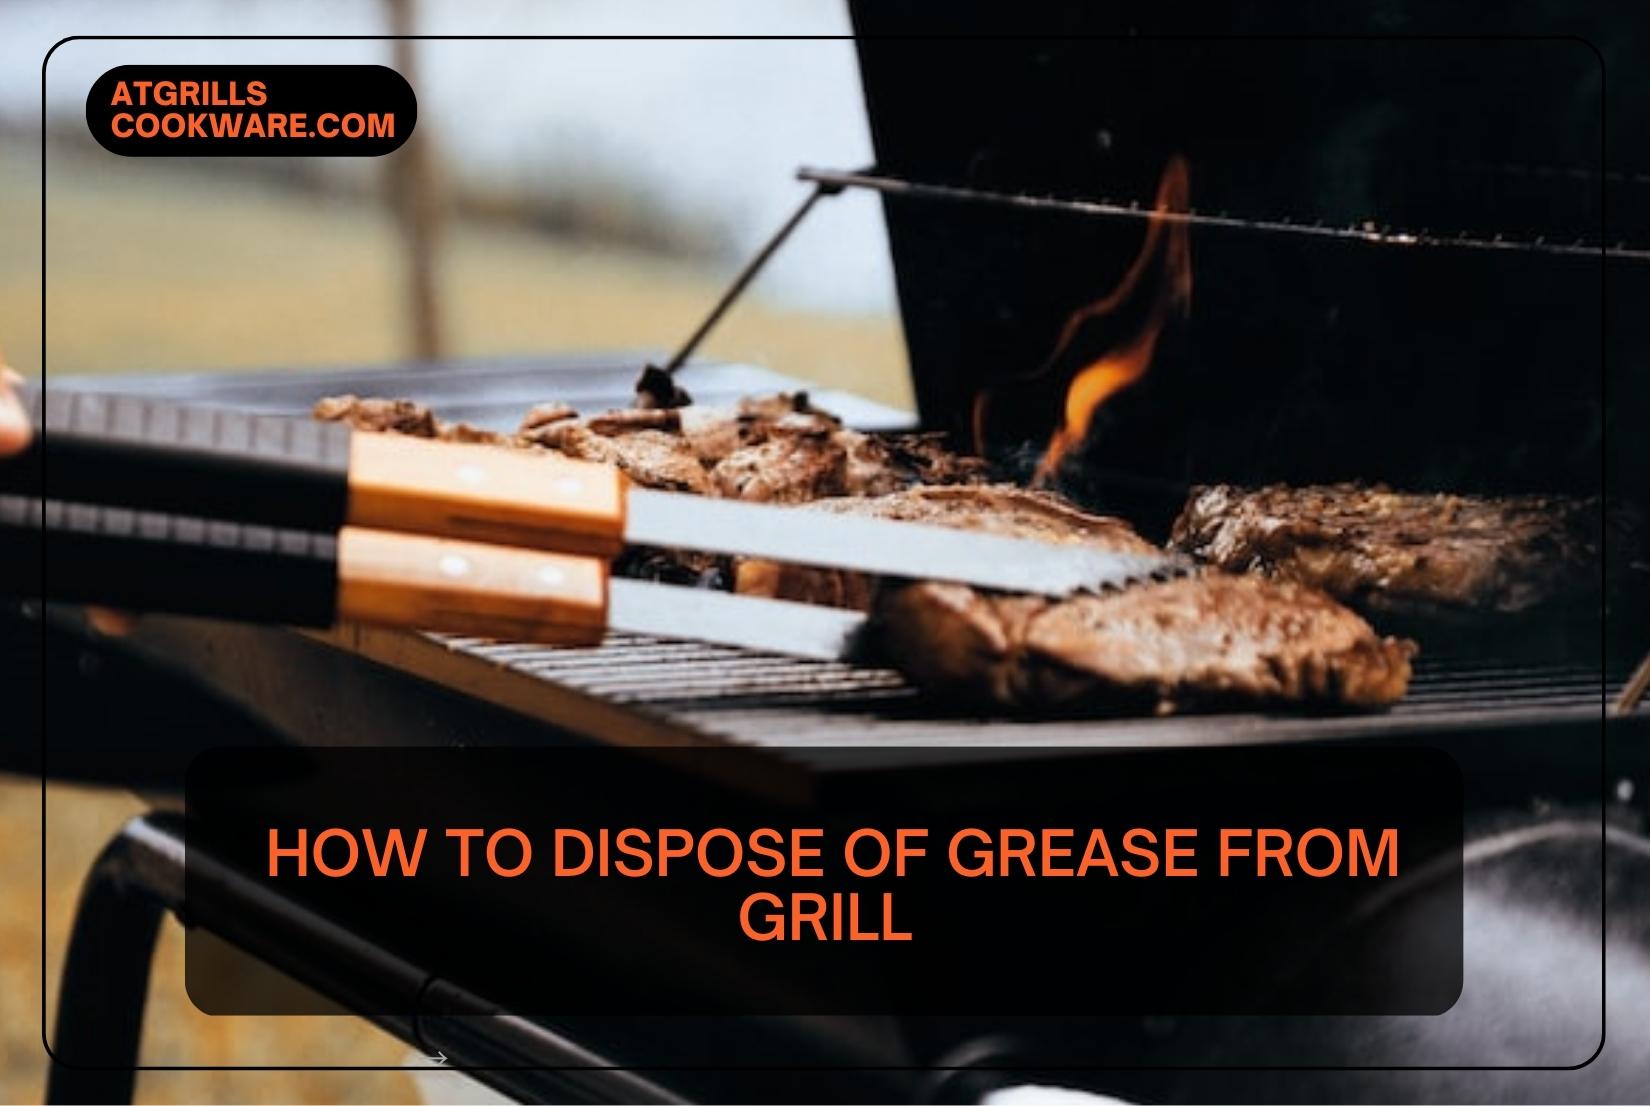  How To Dispose Of Grease From Grill